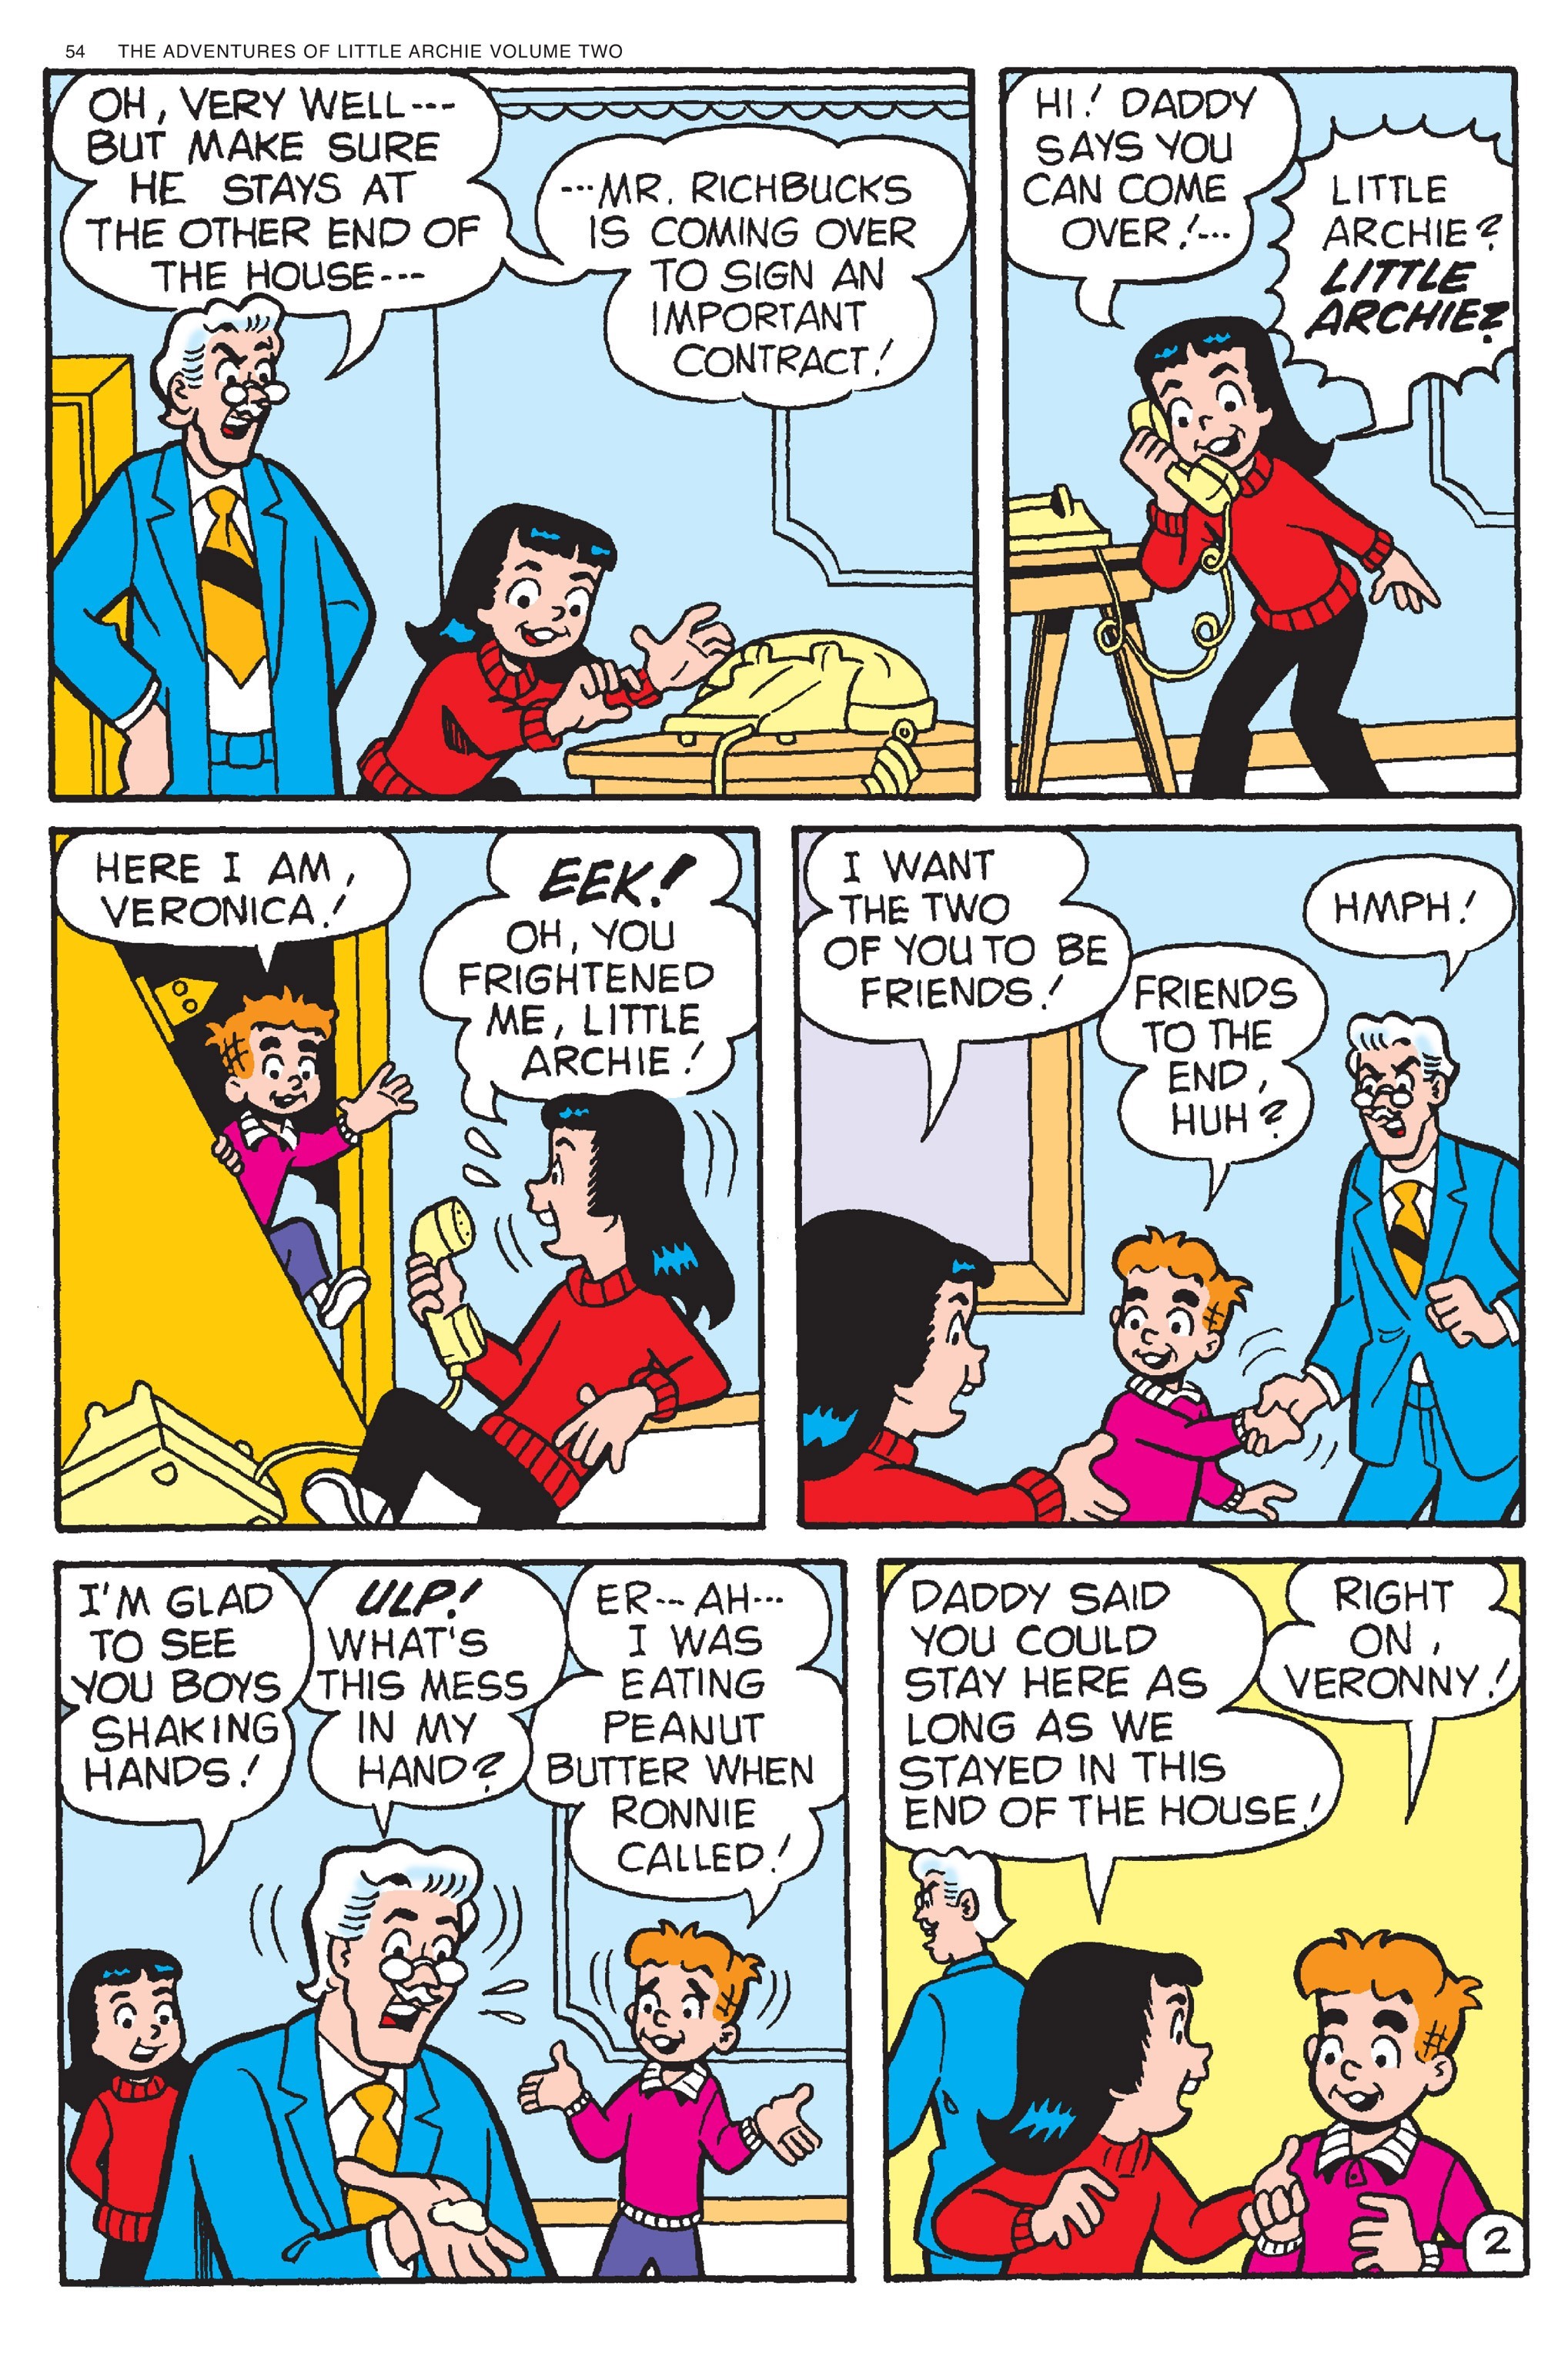 Read online Adventures of Little Archie comic -  Issue # TPB 2 - 55